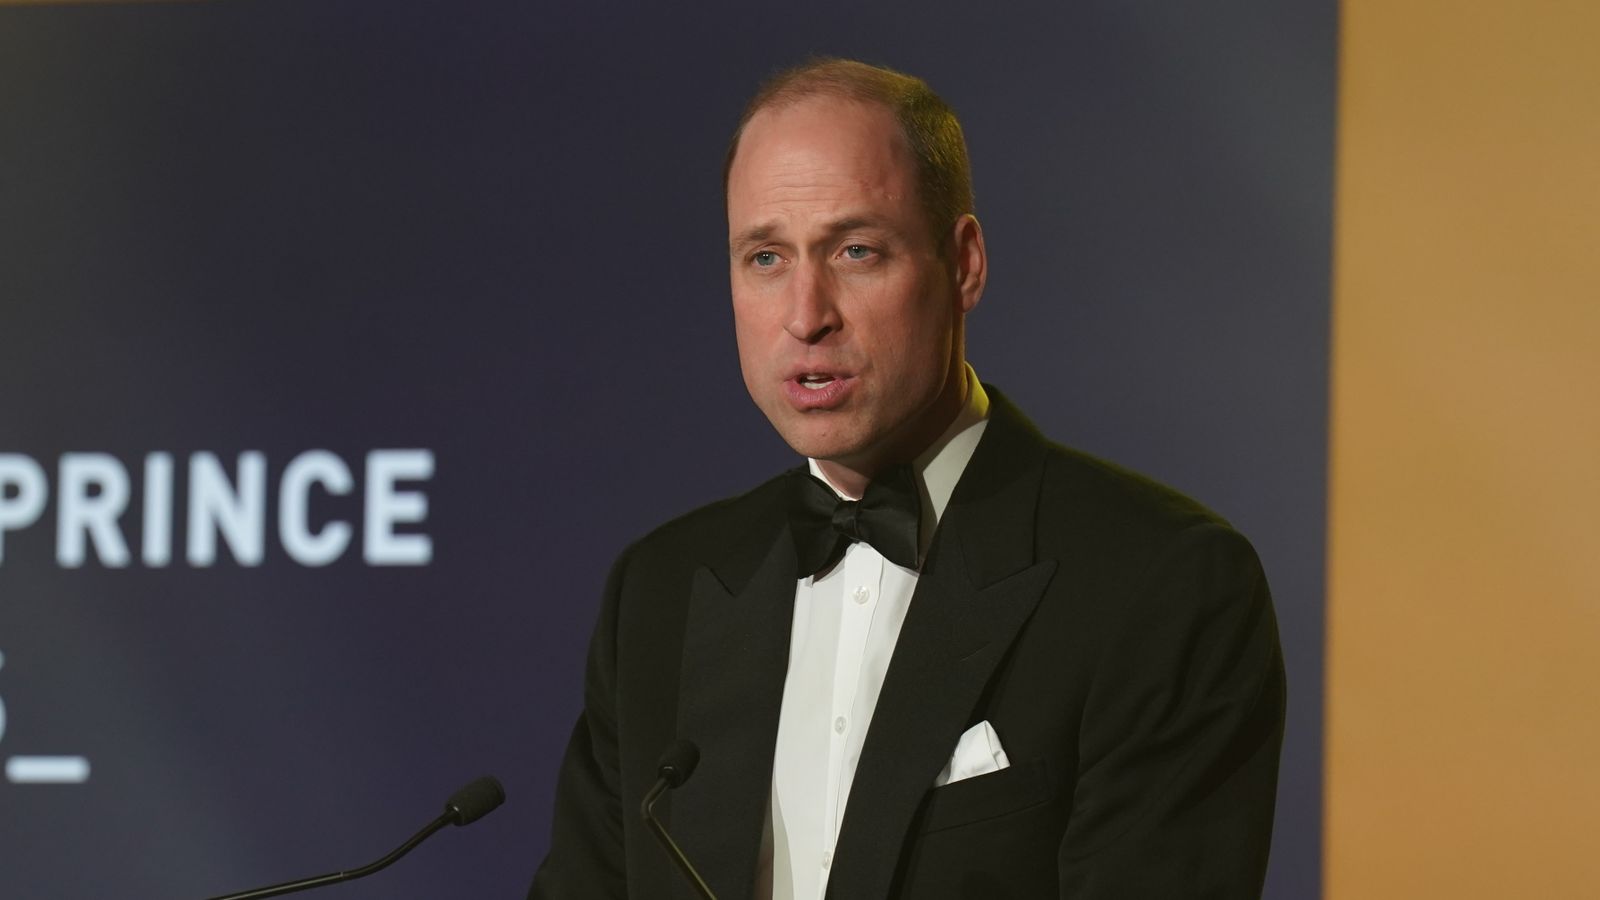 'Everyone has the potential to give back': Prince William says mother's legacy continues to guide him